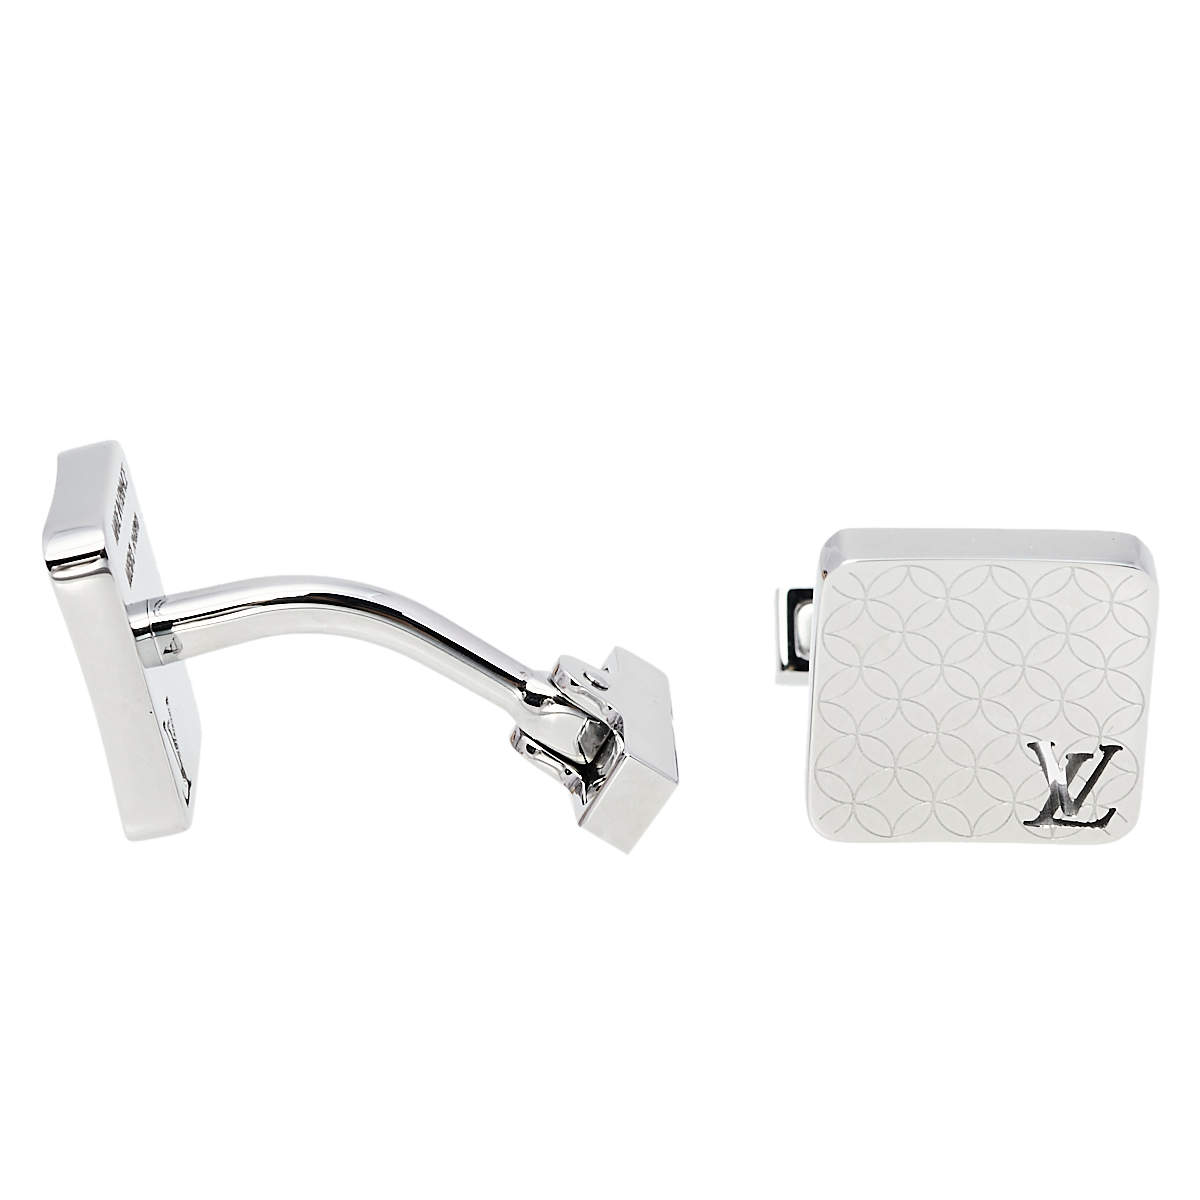 Auth LOUIS VUITTON Stainless Steel Champs Elysees Cufflinks Cuffs #9318